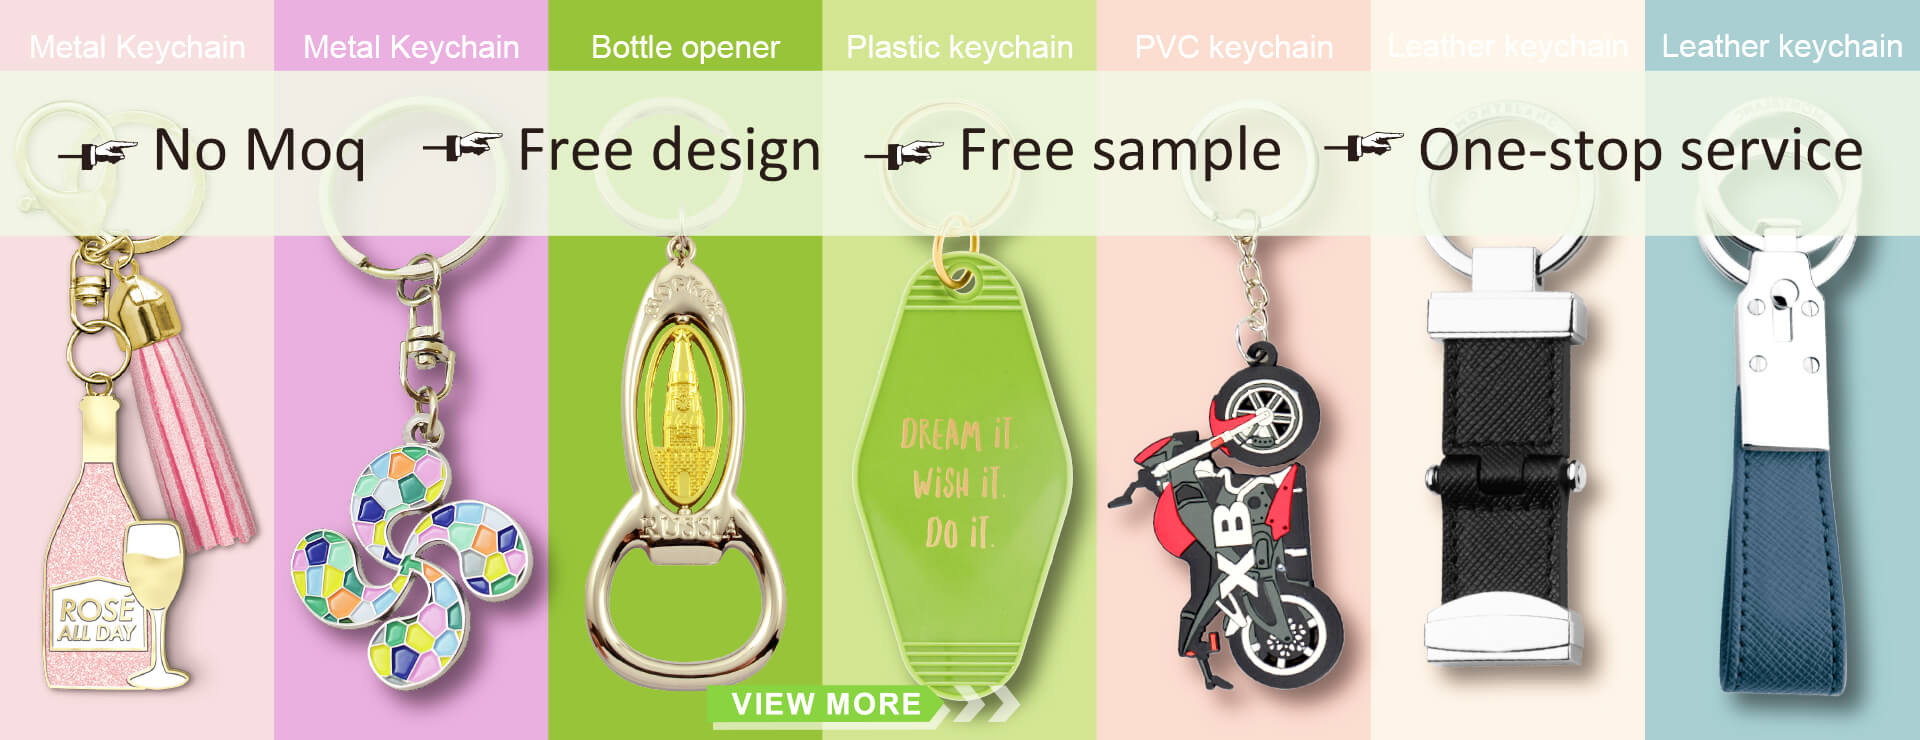 Elevate Your Brand with Our Comprehensive Custom Keychain Services